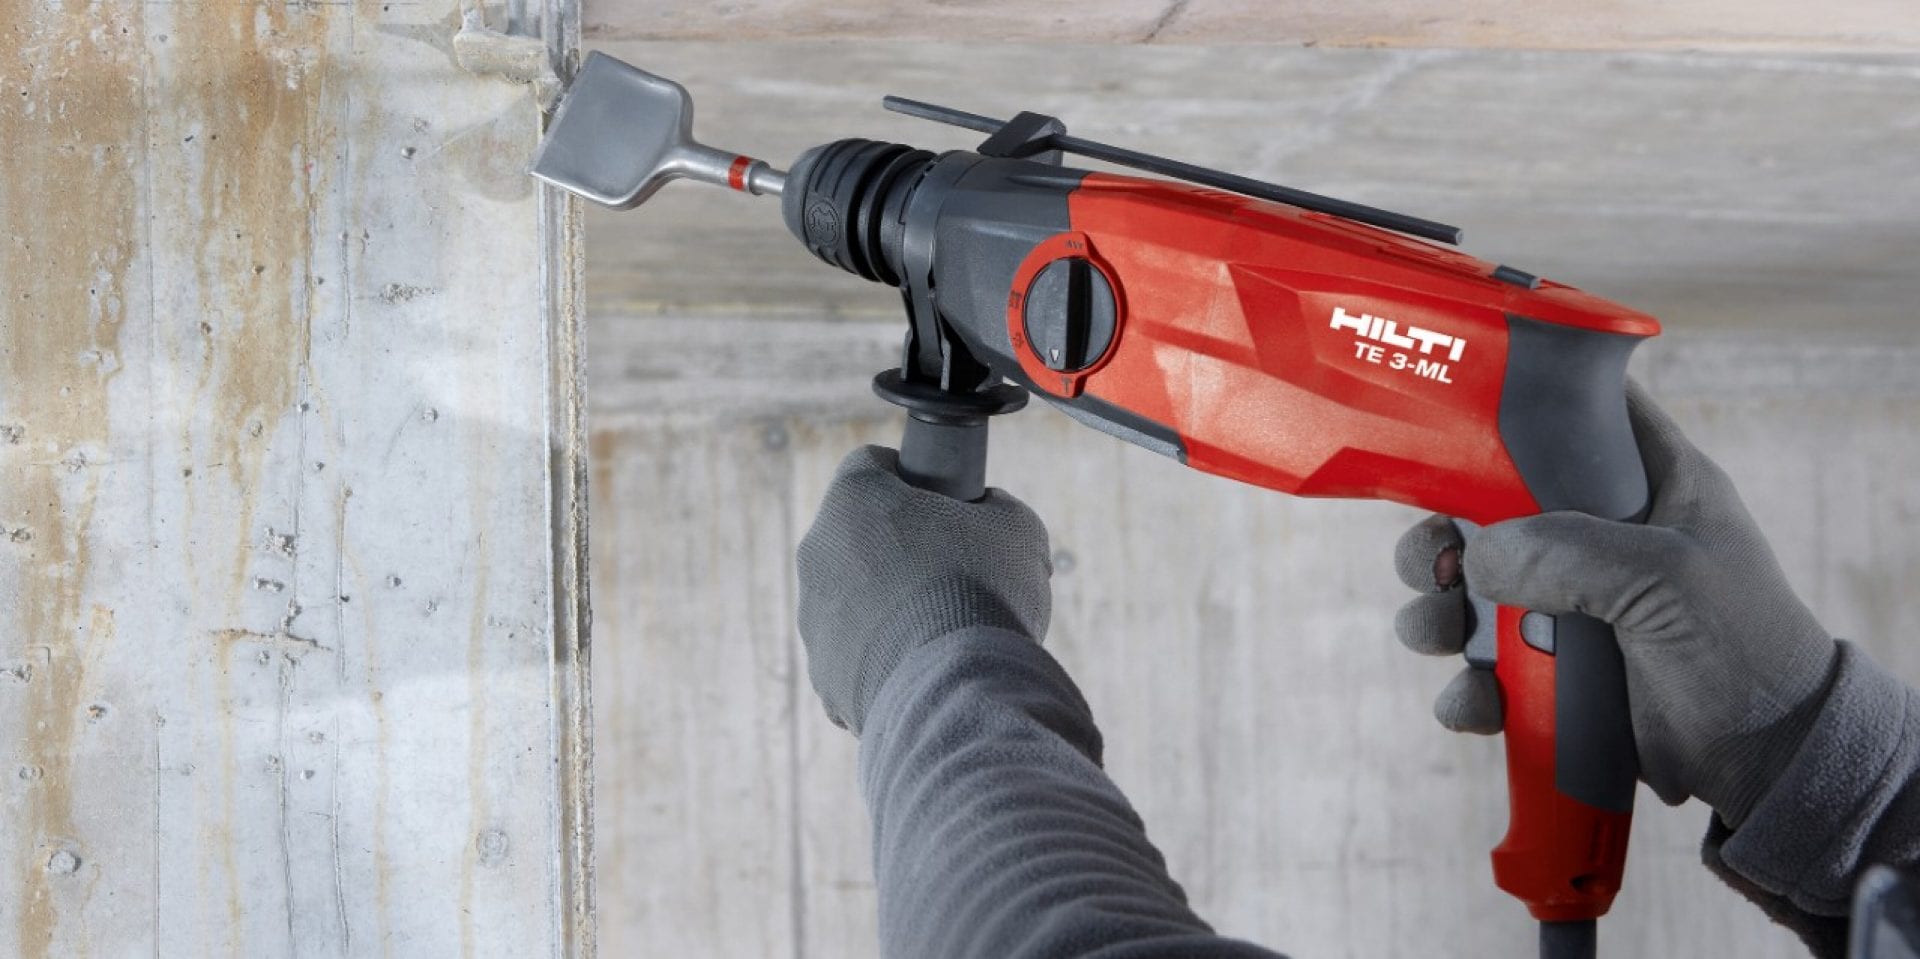 Hilti TE 3-ML hammer drill with its powerful motor